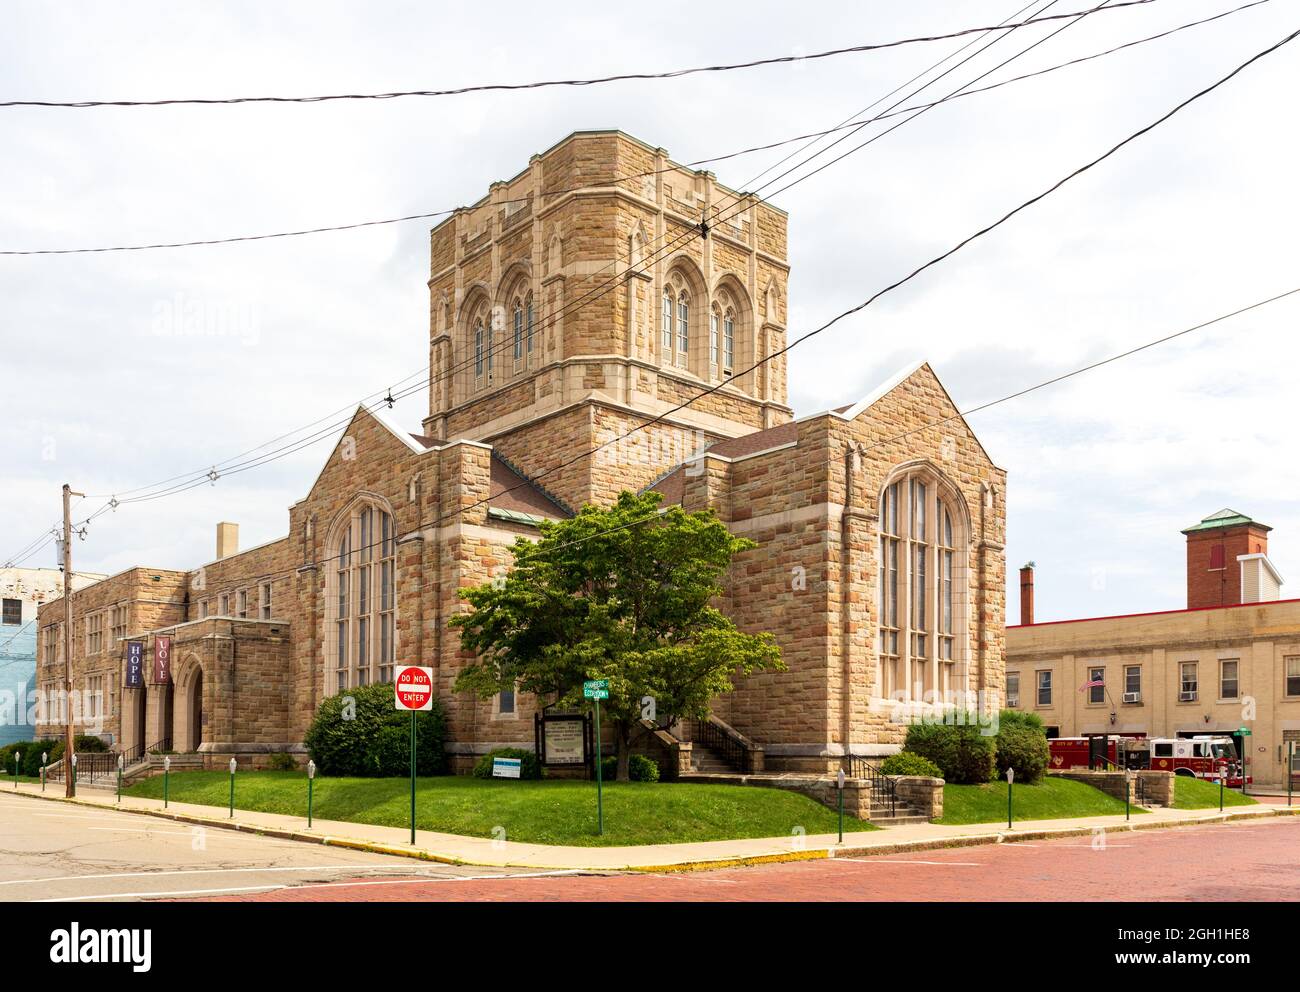 BRADFORD, PA, USA-13 AUGUST 2021: First United Methodist Church, corner view of imposing rock structure. Stock Photo